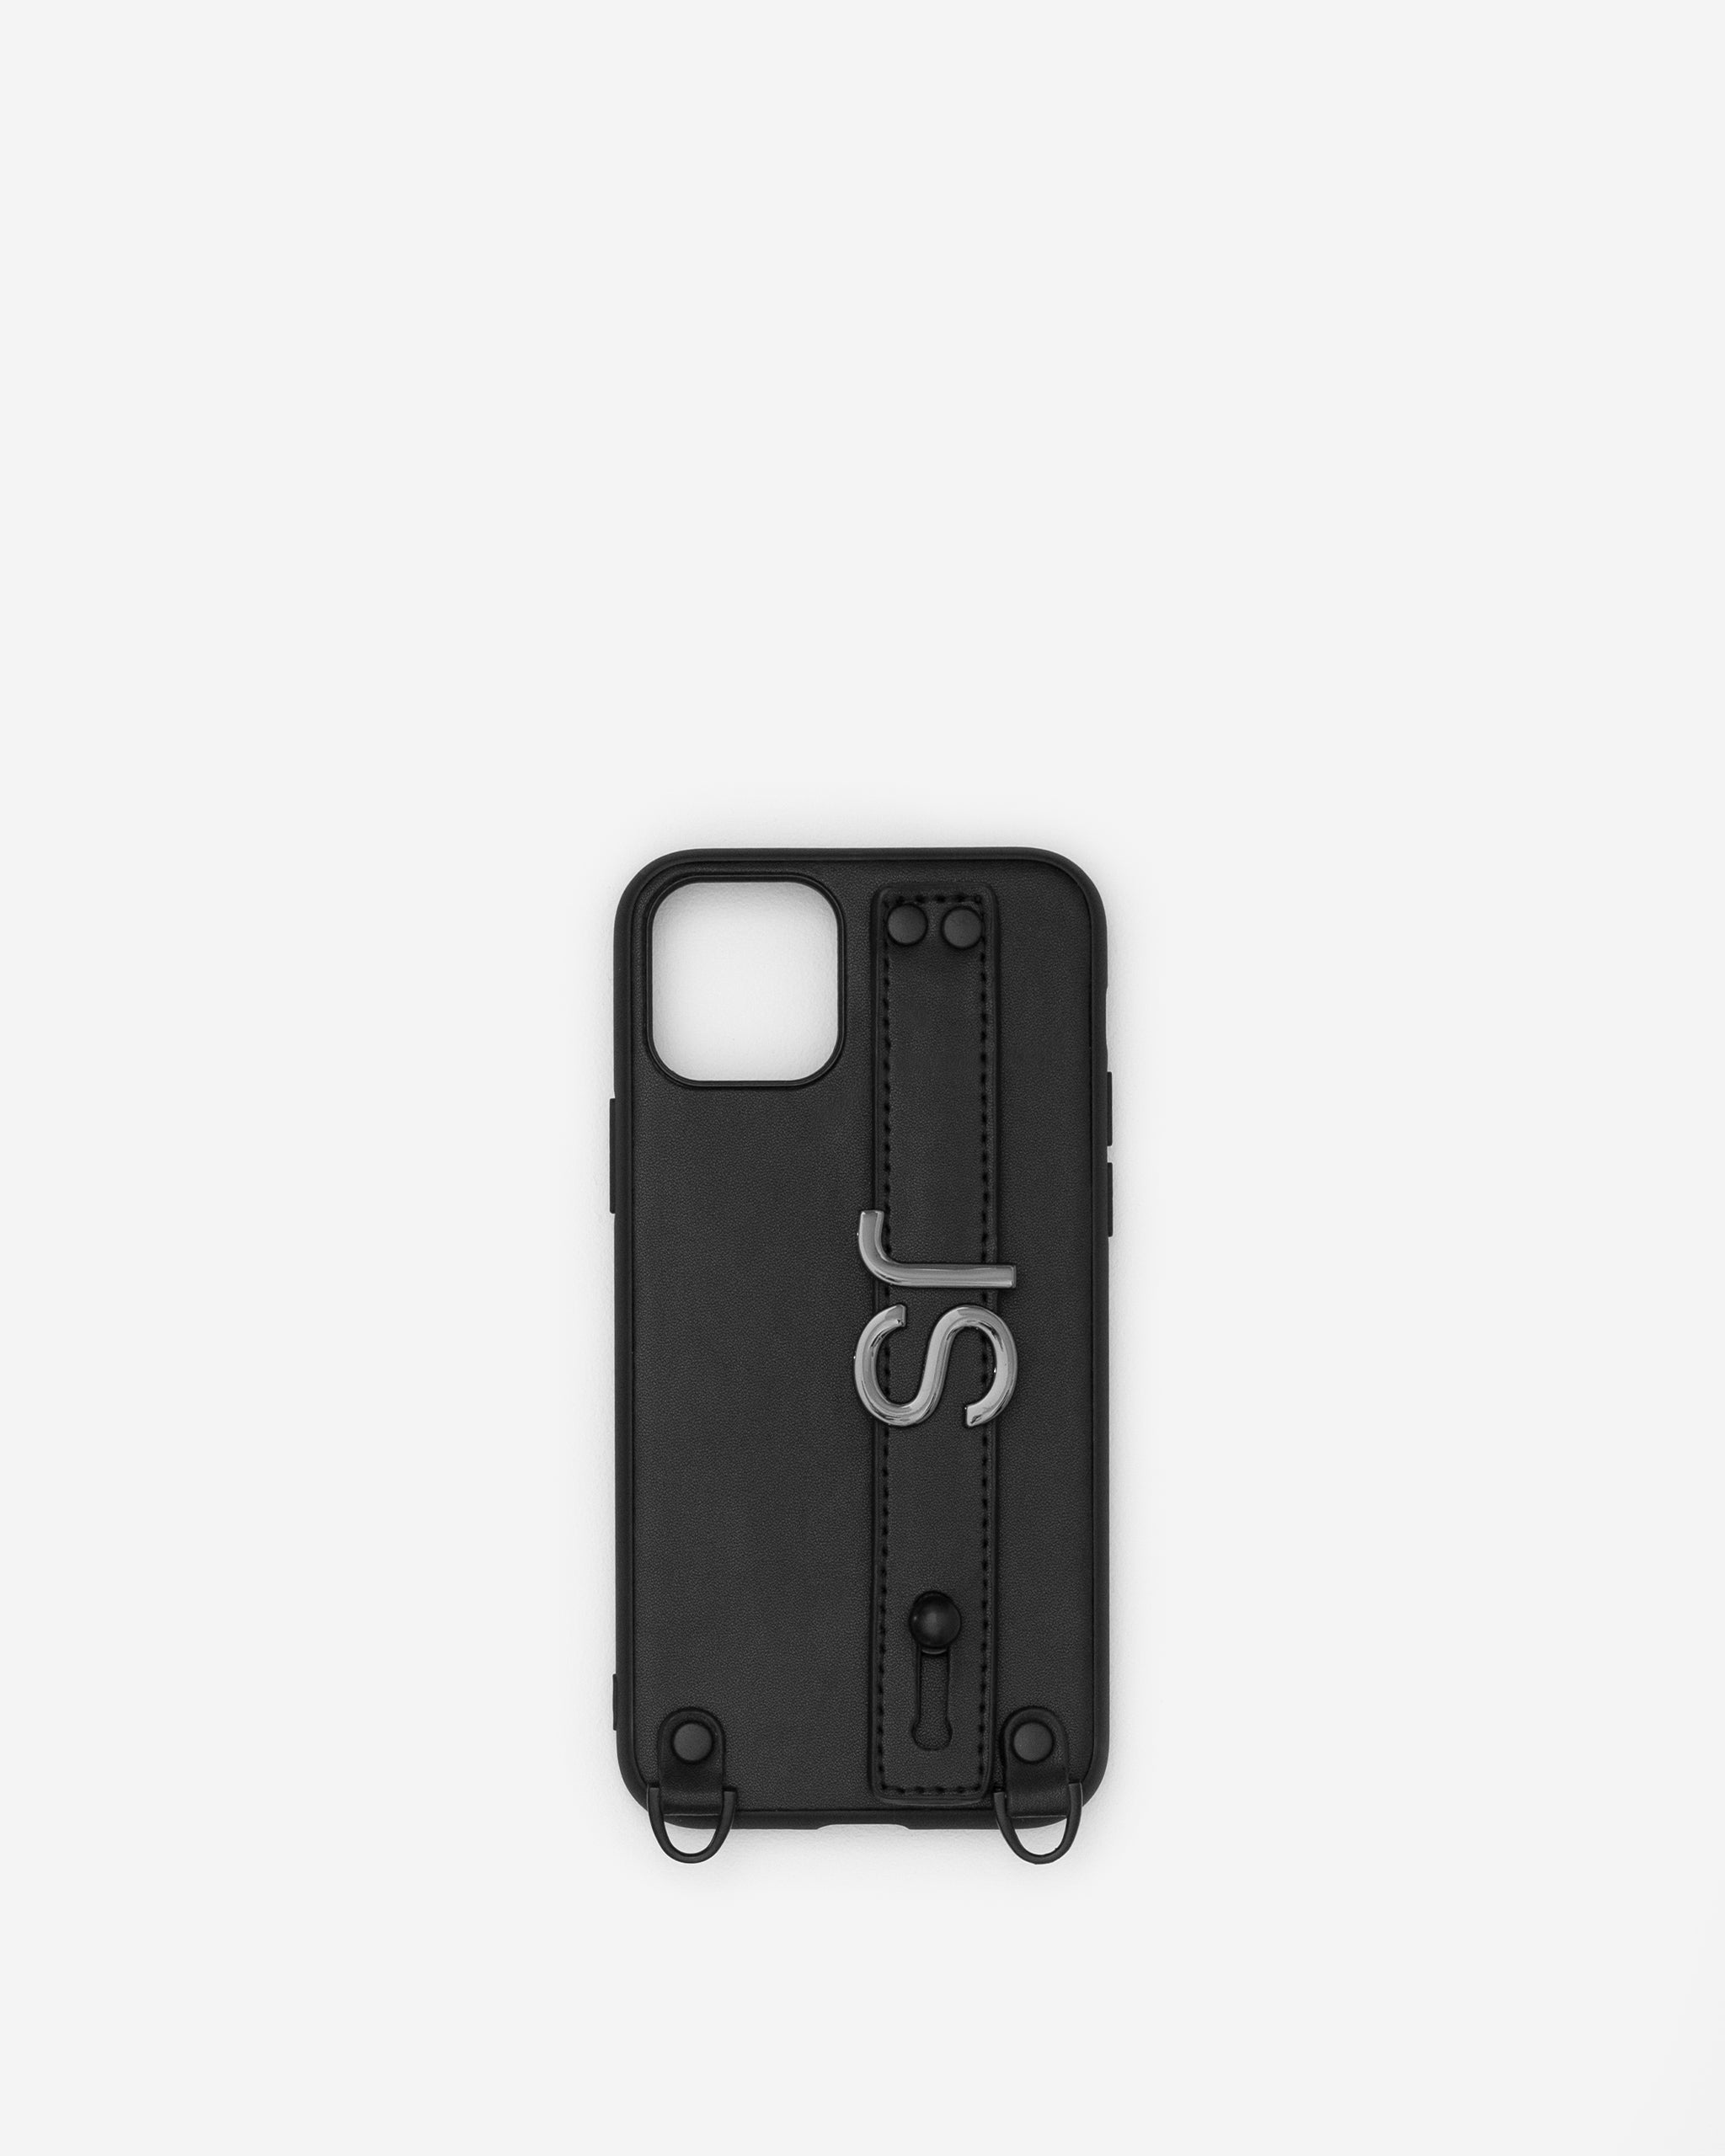 iPhone 11 Pro Case in Black/Gunmetal with Personalised Hardware